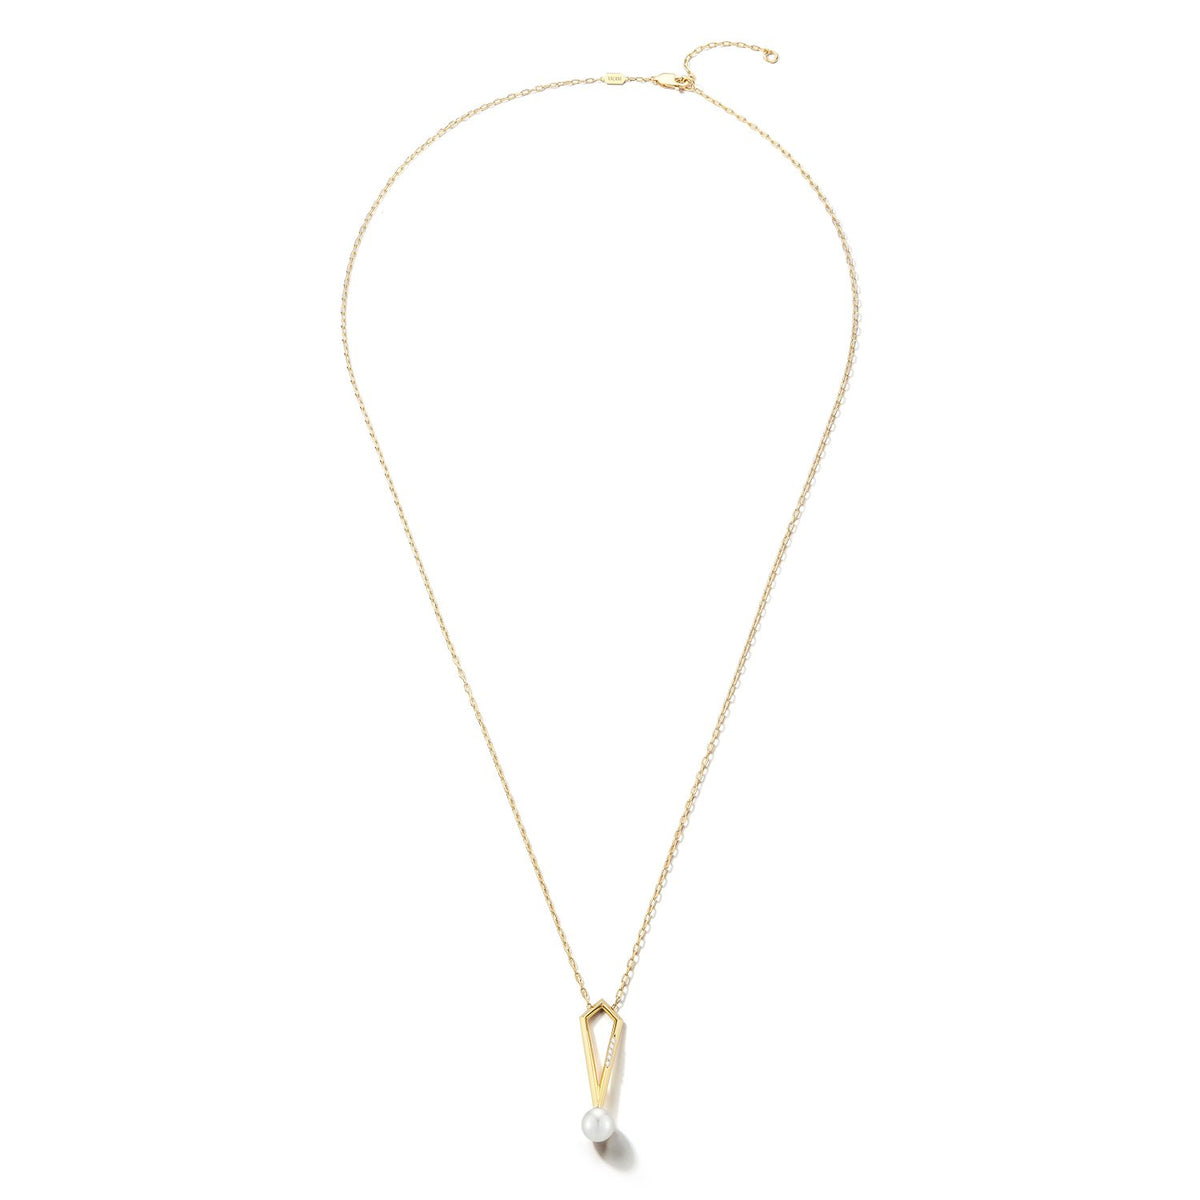 Valani 18K Yellow Gold Artem Pearl Necklace